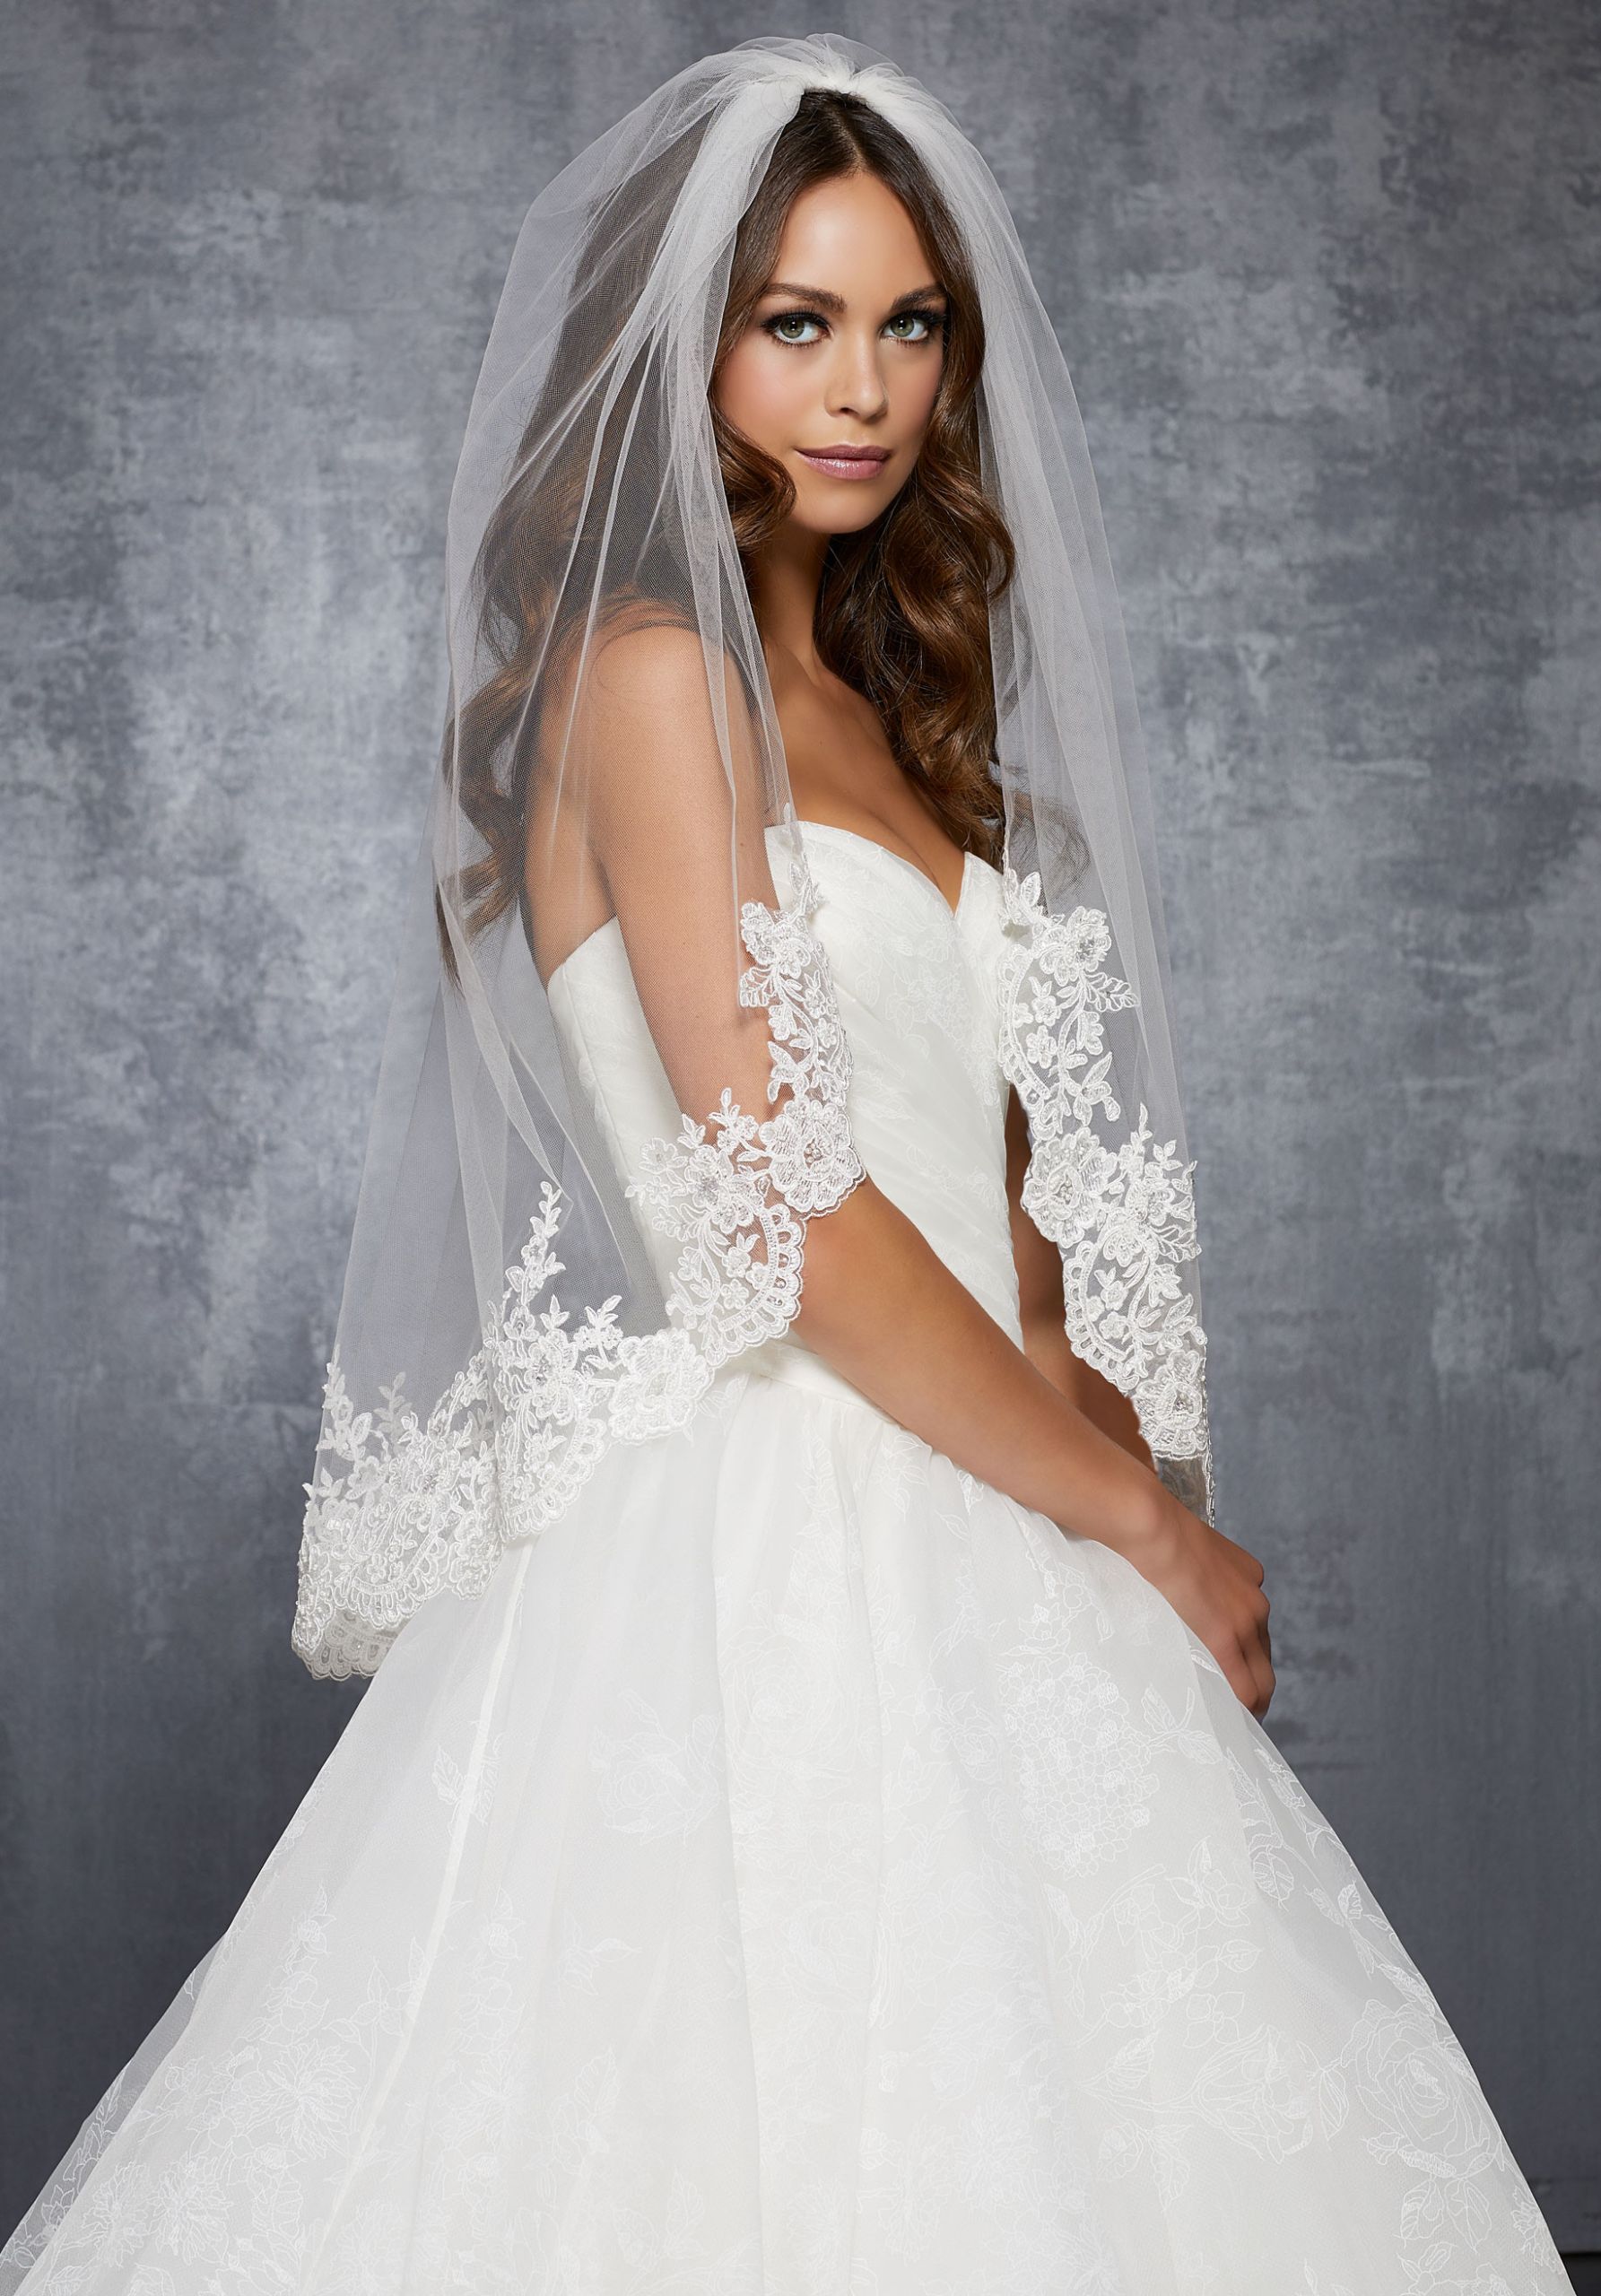 Wedding Dress And Veil
 Veil with Lace Beaded with Sequins and Rhinestones